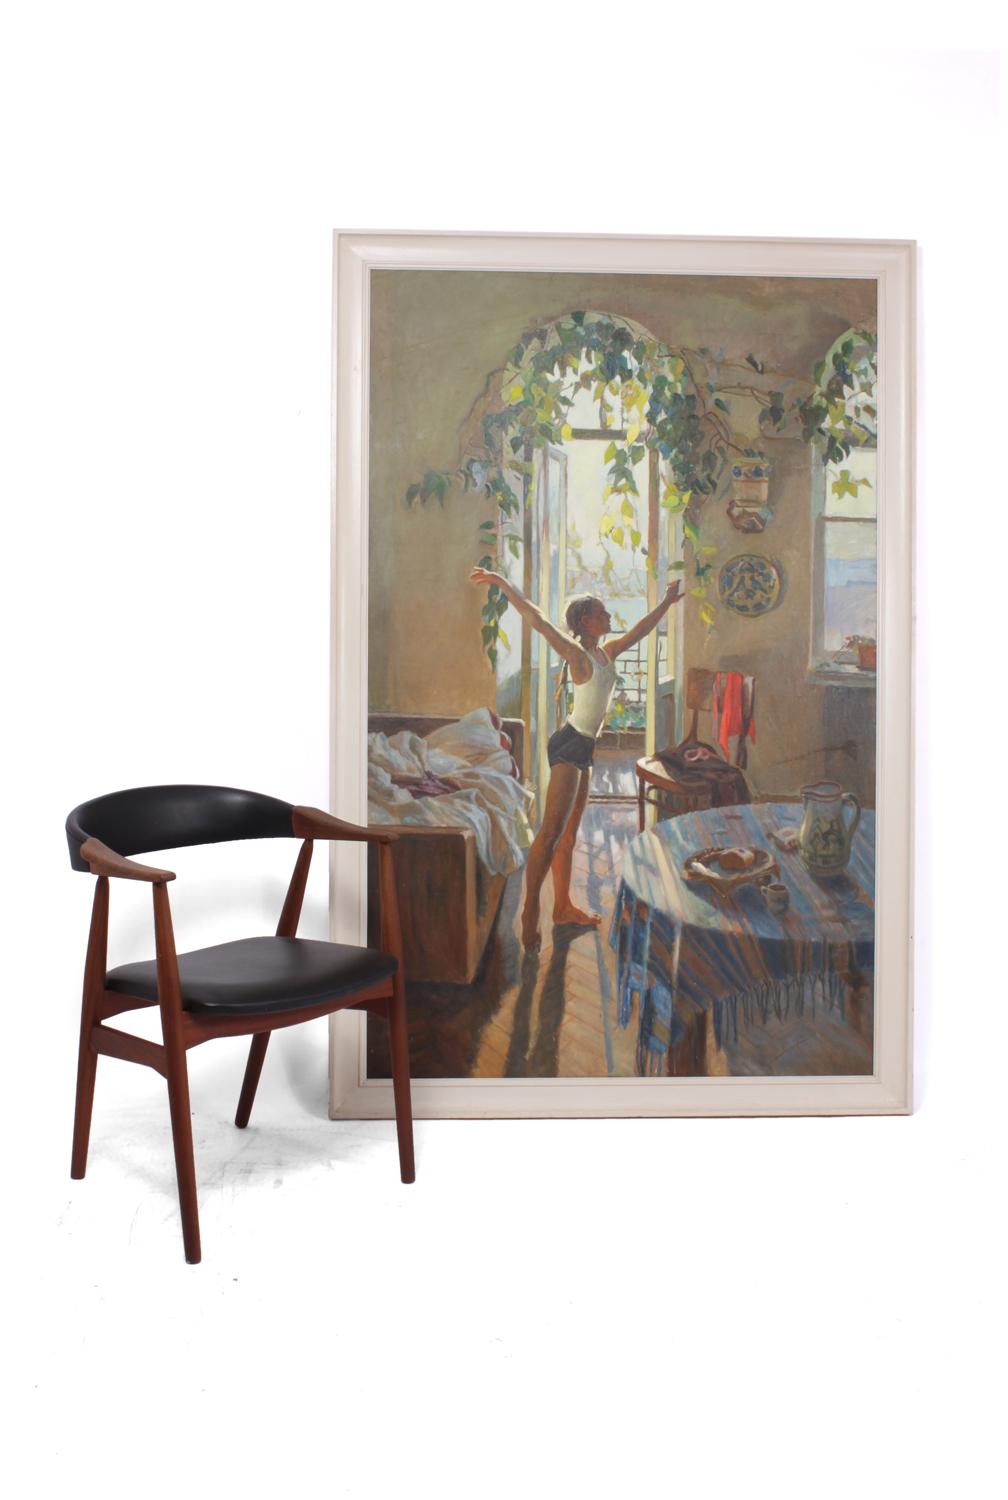 Framed oil on canvas, late 20th century
A very large famed oil on canvas of young ballerina stretching in the morning sun, in what appears to be a continental ( maybe Italy ) dining room in an apartment this painting is unsigned

Age: 1990-